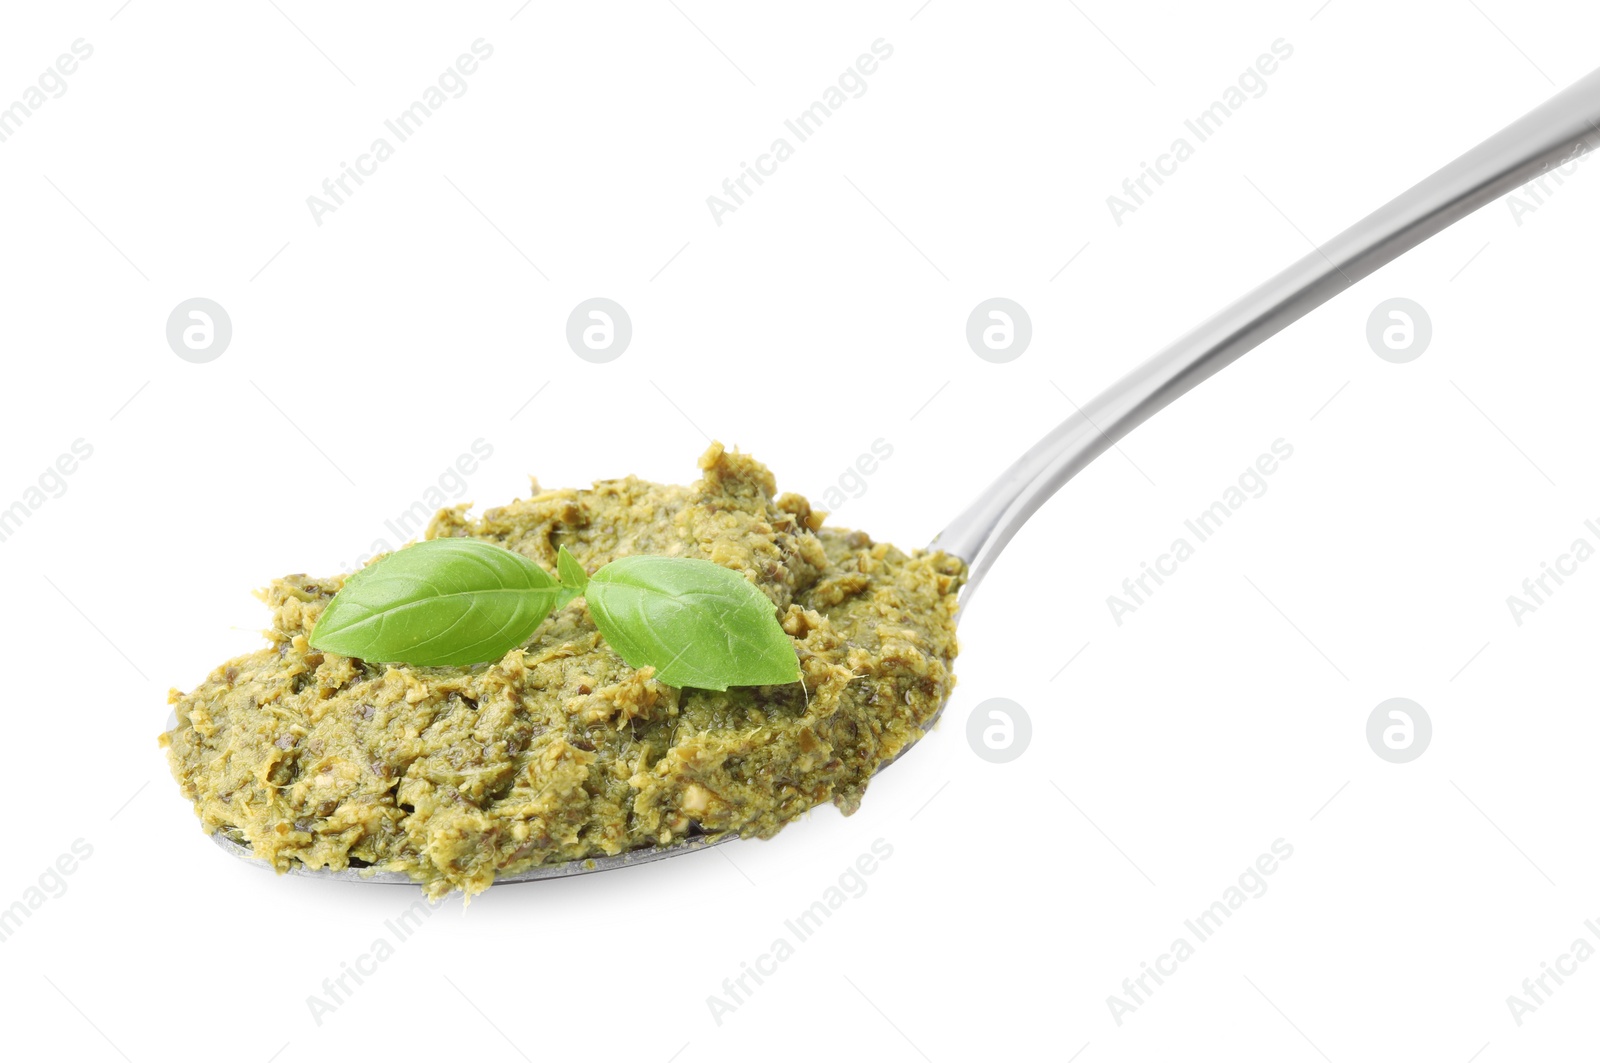 Photo of Spoon with delicious pesto sauce and basil isolated on white